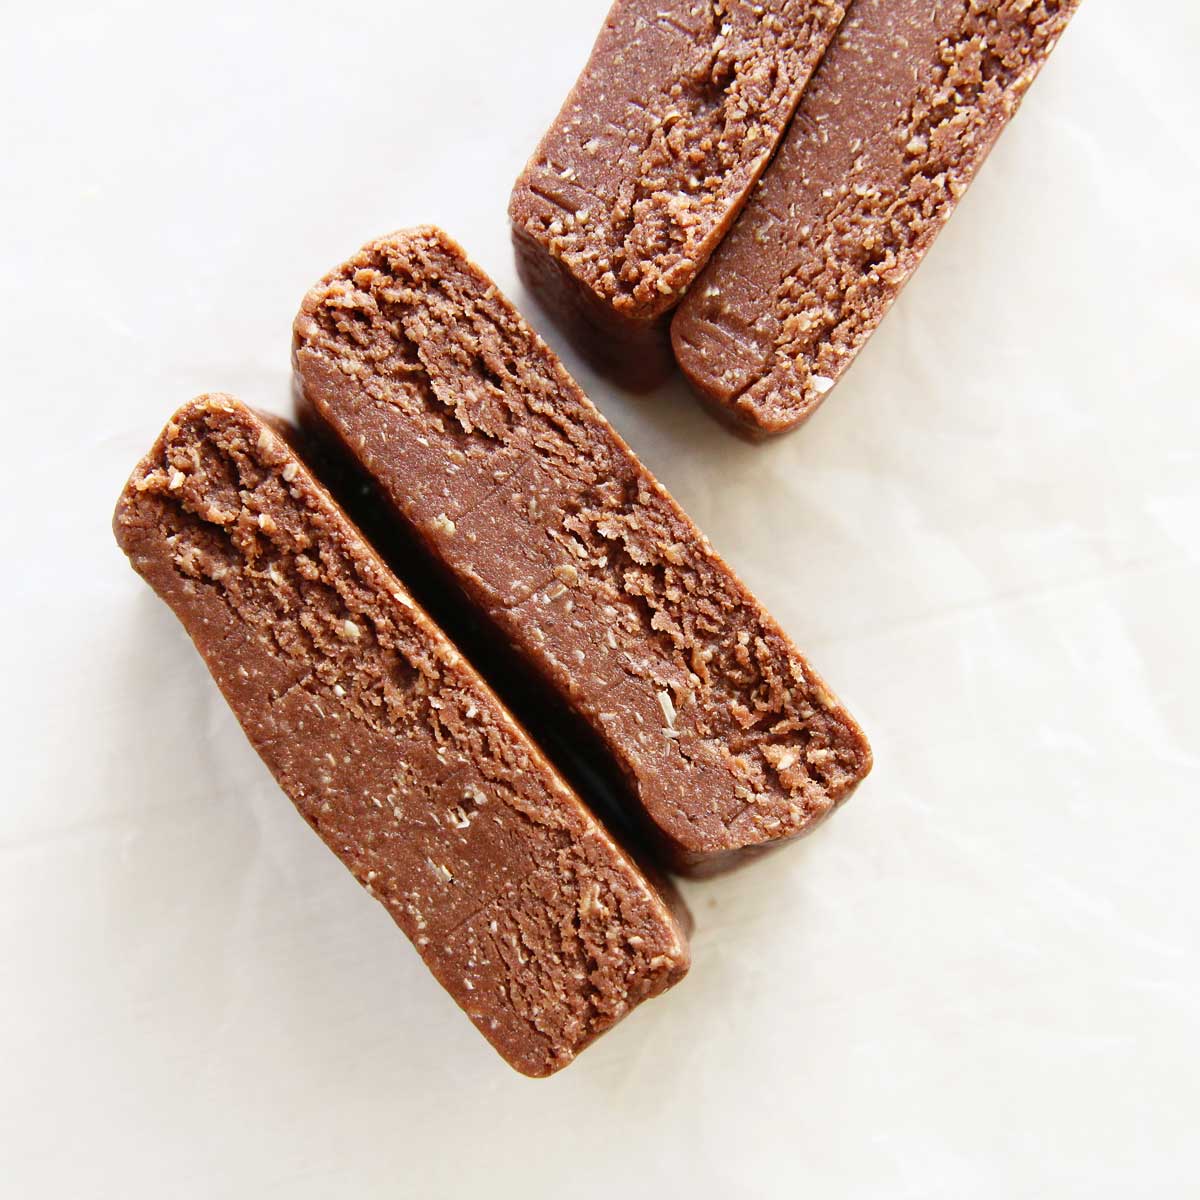 10-Minute Chocolate Peanut Butter Oatmeal Protein Bars - birthday cake protein bars